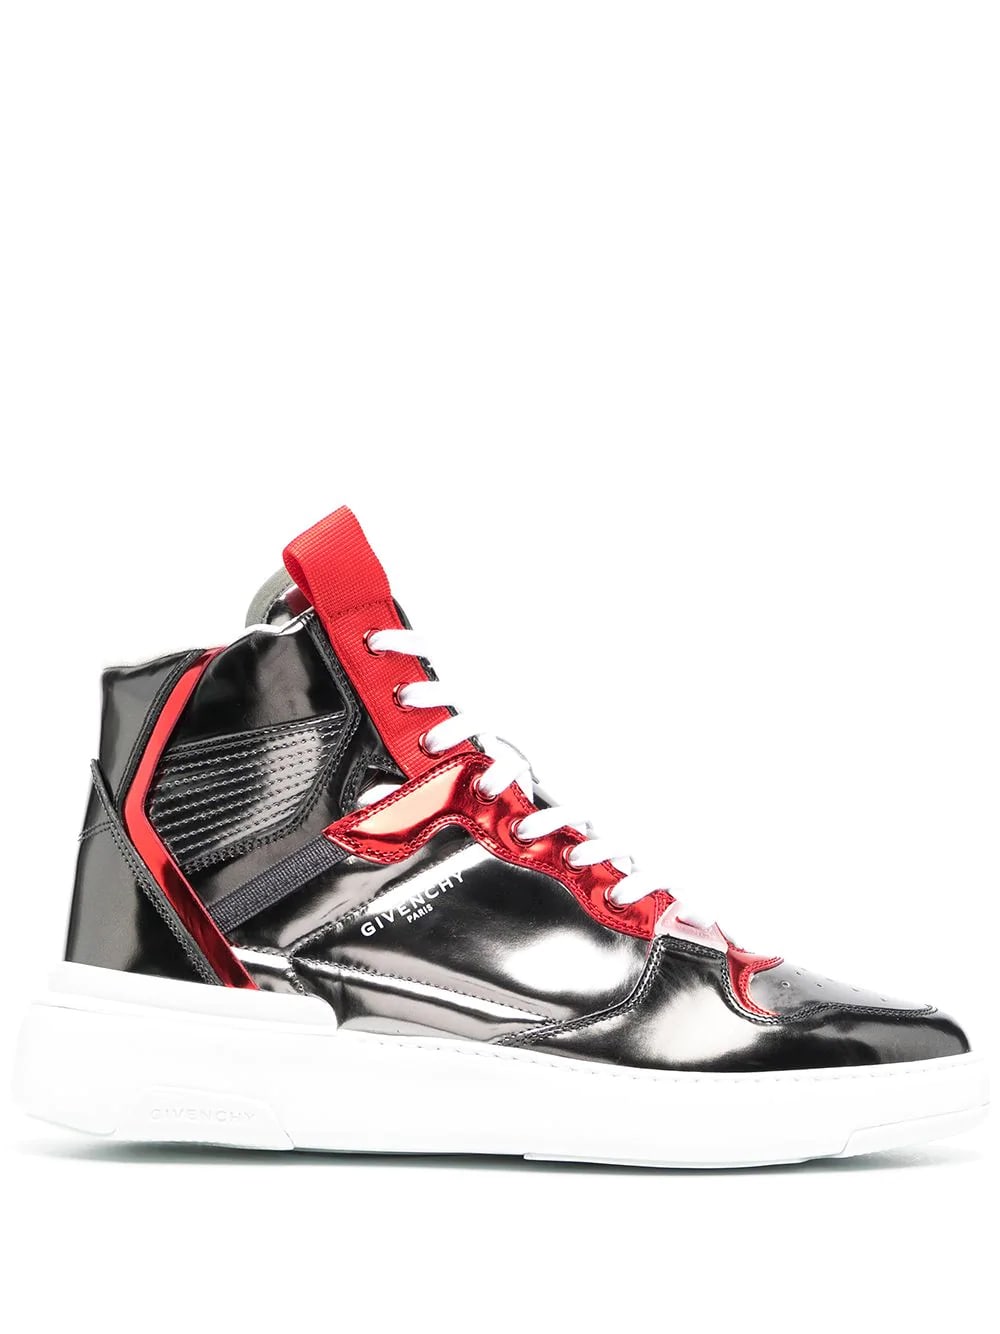 Givenchy Man Grey And Red Metallic Wing Sneakers